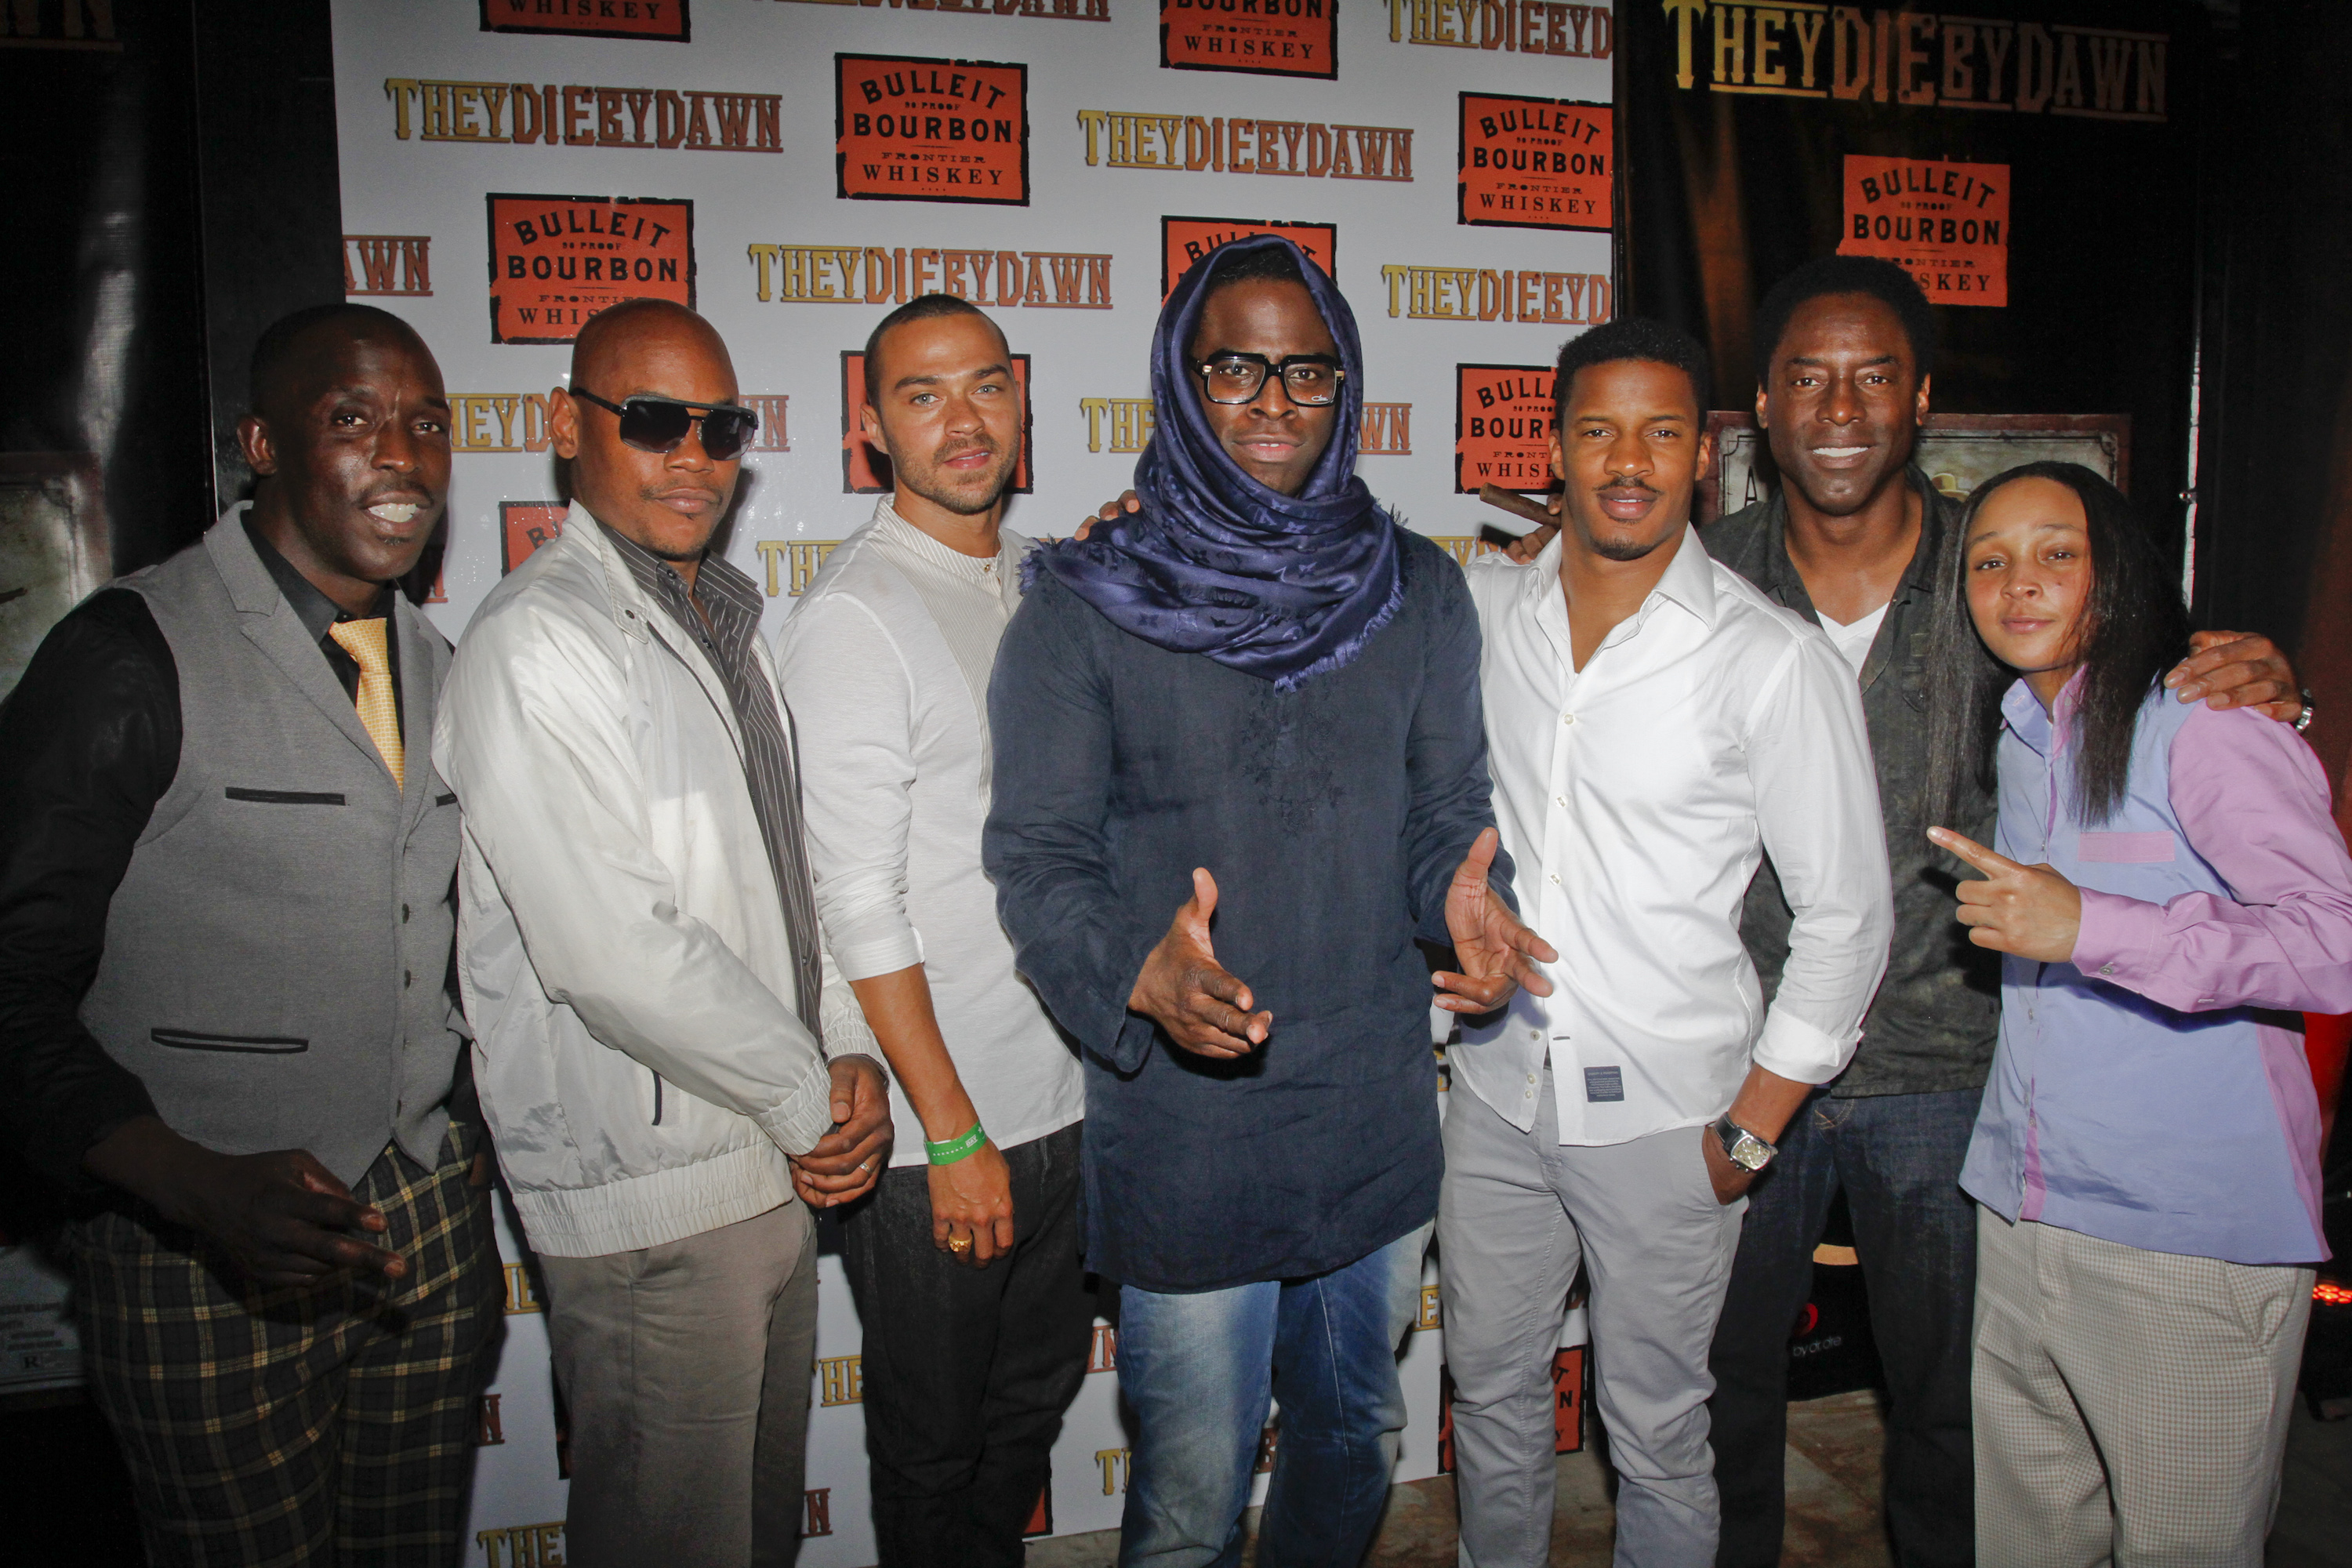 Michael K. Williams, Bokeem Woodbine, Jesse Williams, Jeymes Samuel, Nate Parker, Isaiah Washington, Felicia Parker - on the red carpet at the Bulleit Bourbon presents "They Die by Dawn" premiere at SXSW, on Saturday, March 16, 2013 in Austin, Texas. (Photo by Jack Plunkett/Bulleit Bourbon)